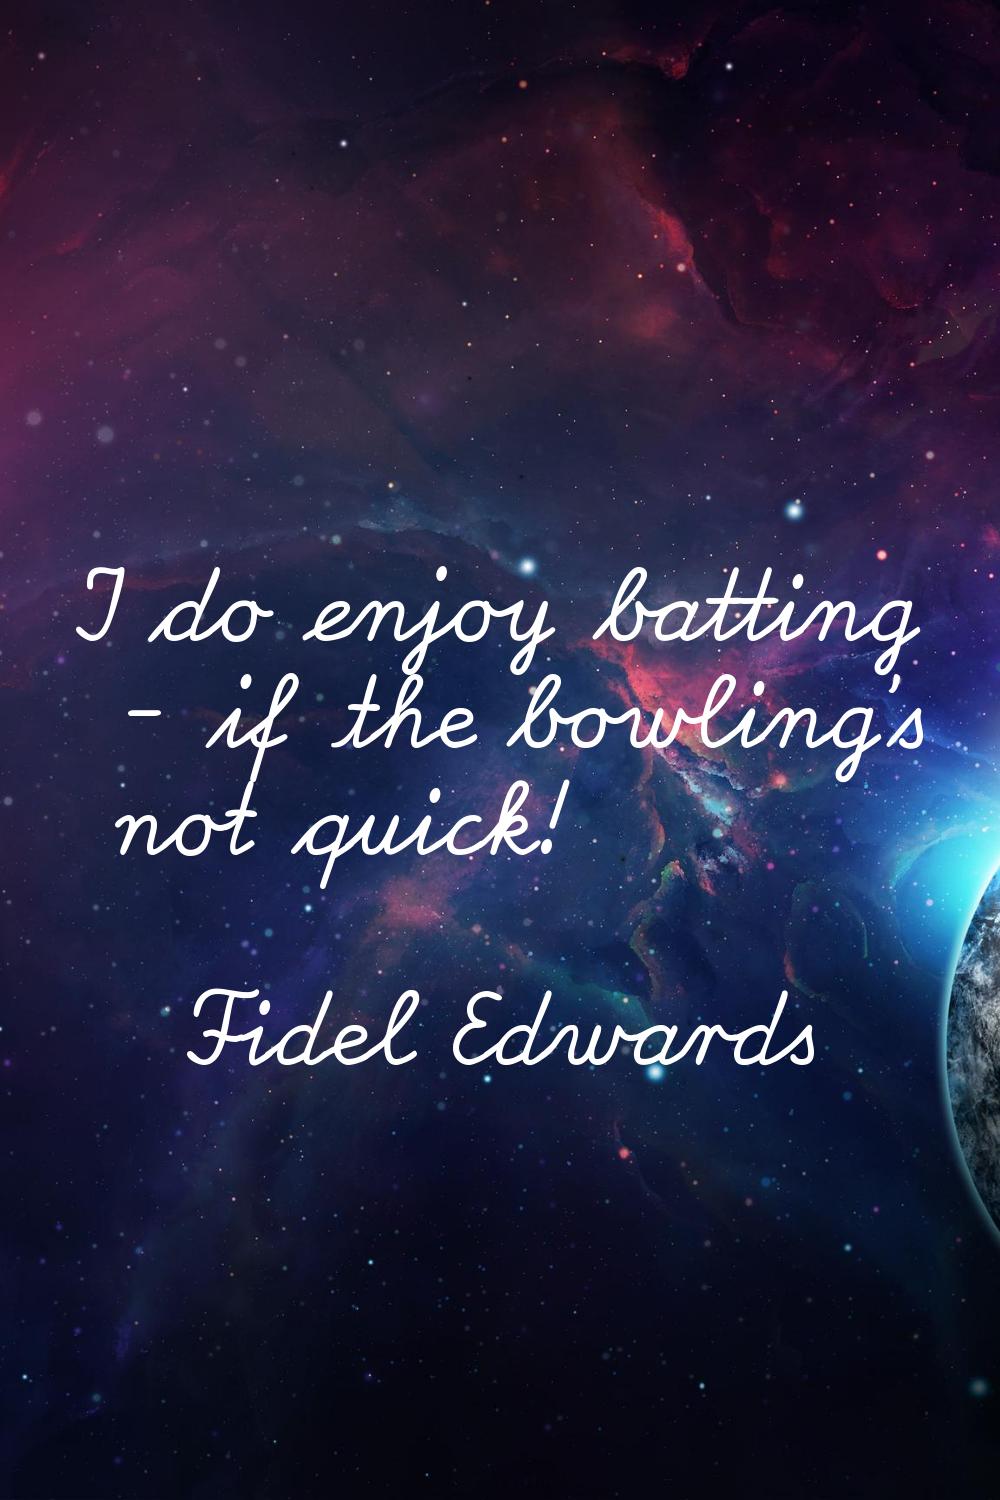 I do enjoy batting - if the bowling's not quick!